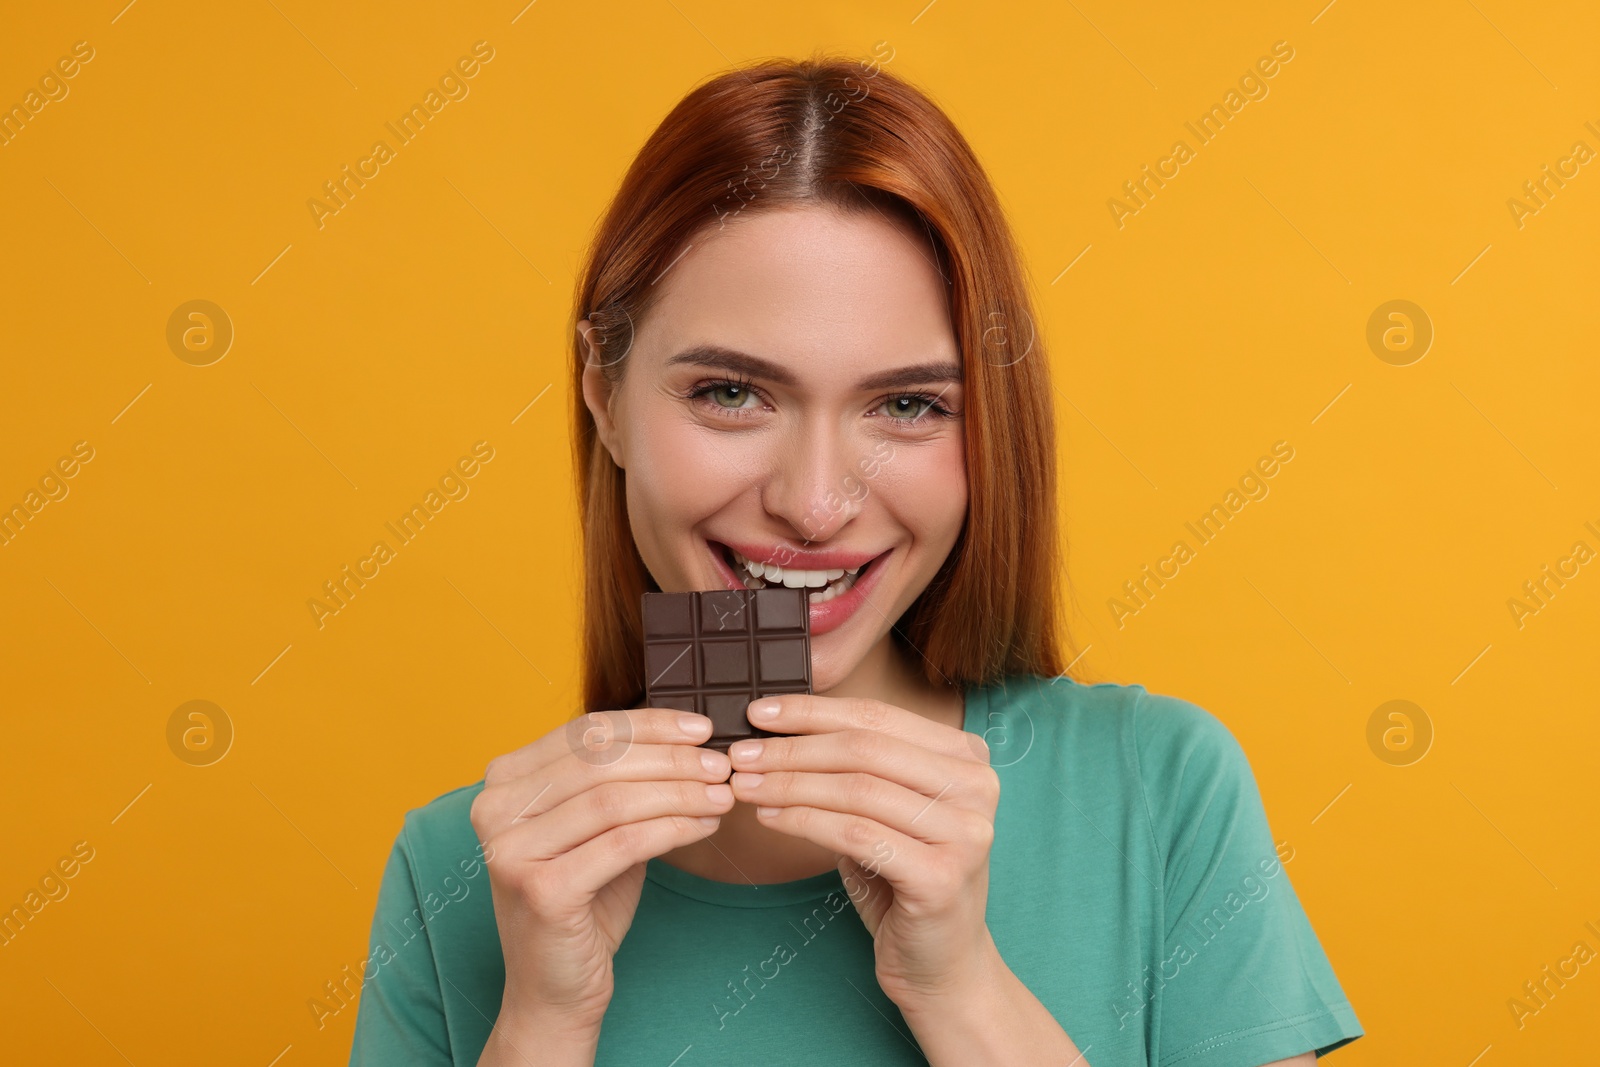 Photo of Young woman eating tasty chocolate on orange background